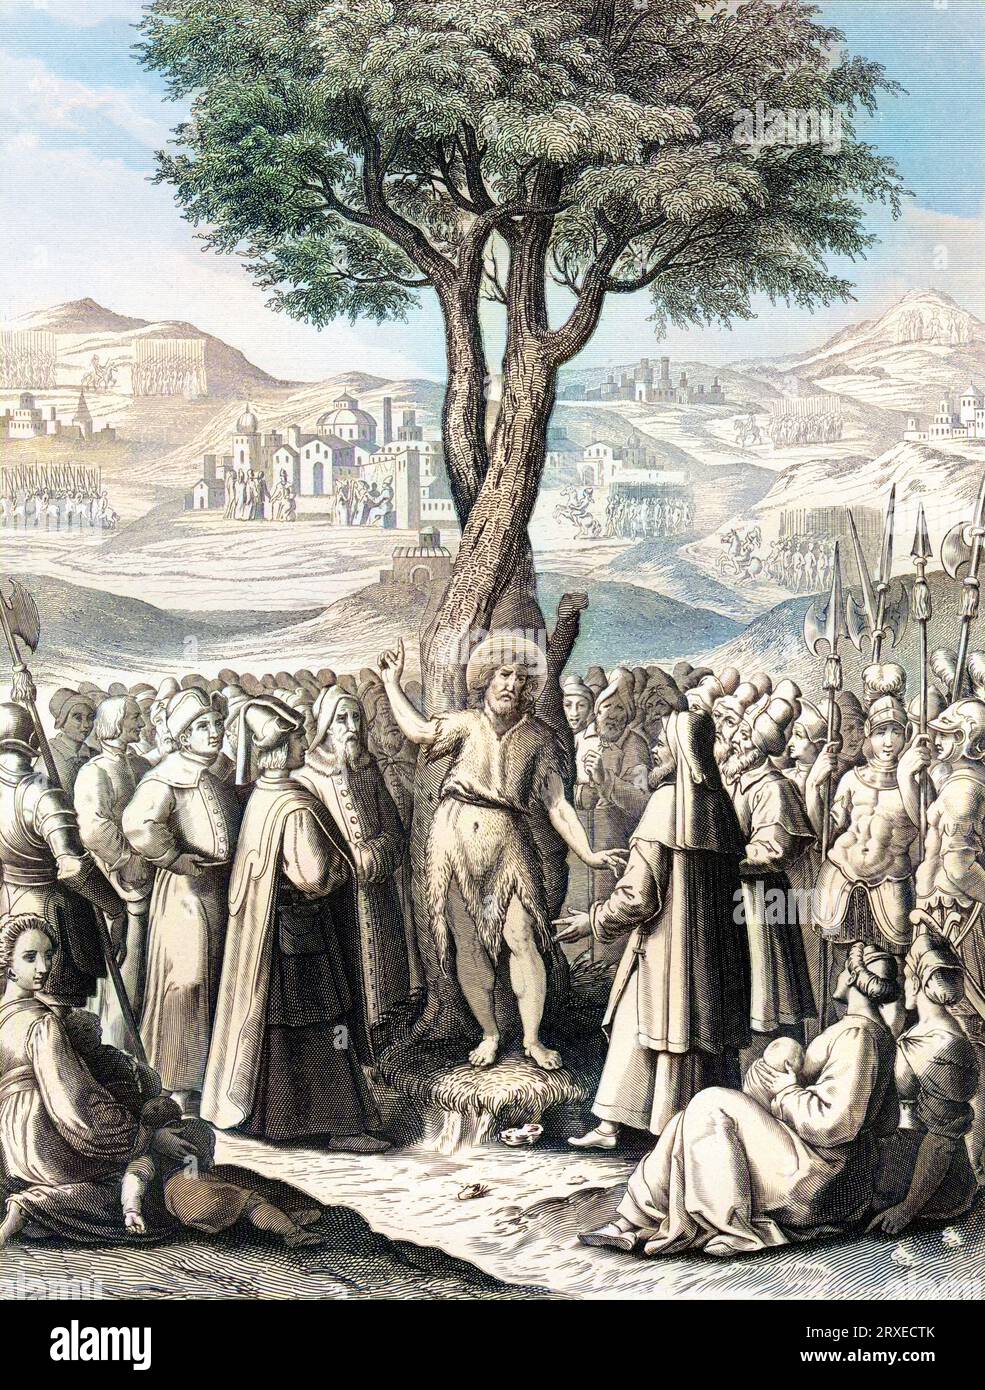 John the Baptist, preaching in the wilderness of Judaea. Colored Illustration for The life of Our Lord Jesus Christ written by the four evangelists, 1853 Stock Photo